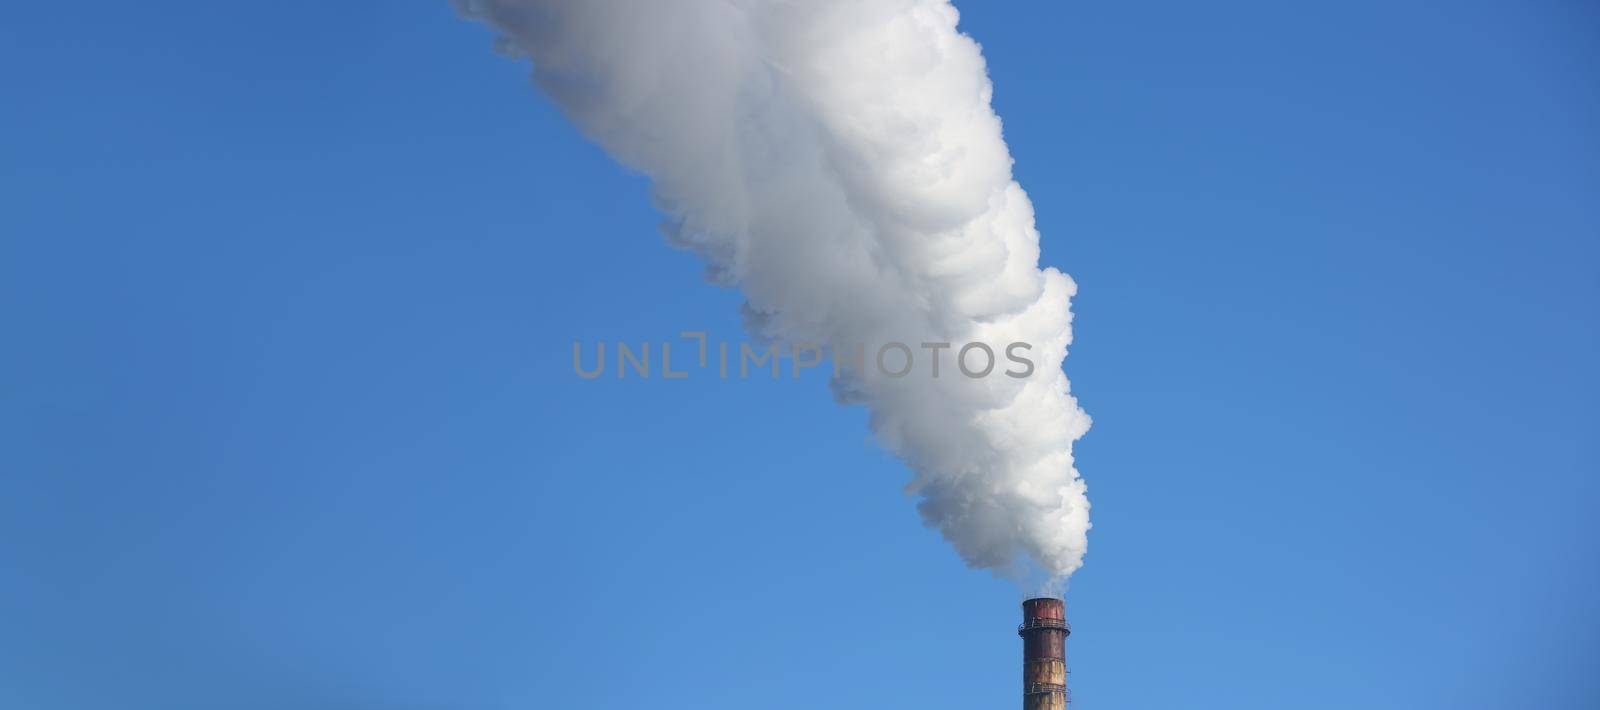 Chimney blows white smoke into blue sky. Air pollution from an industrial chimney